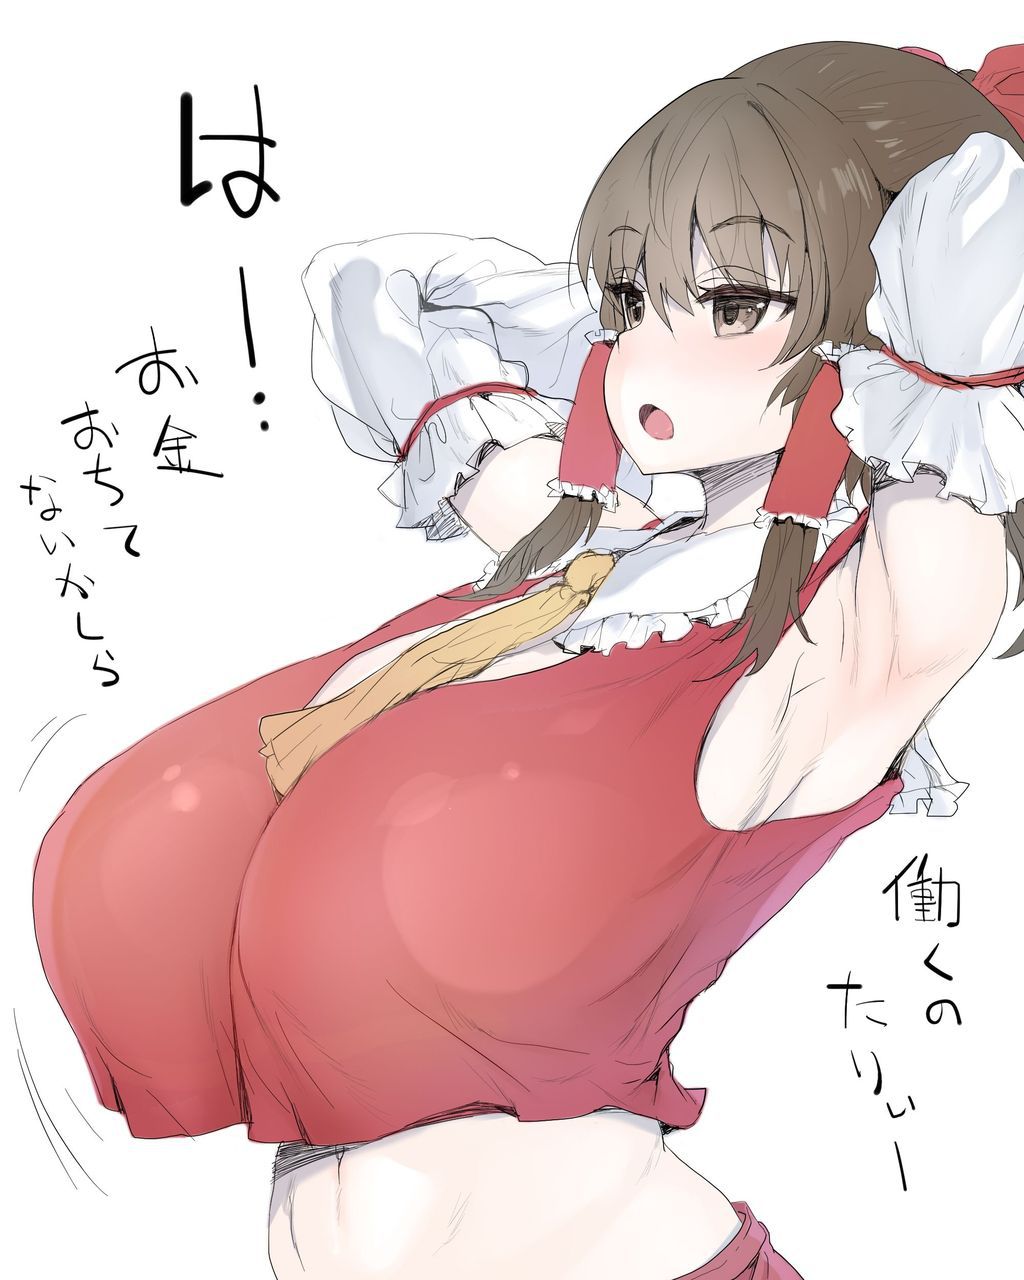 【Shrine Maiden】Please image of a girl in neat shrine maiden clothes Part 18 20